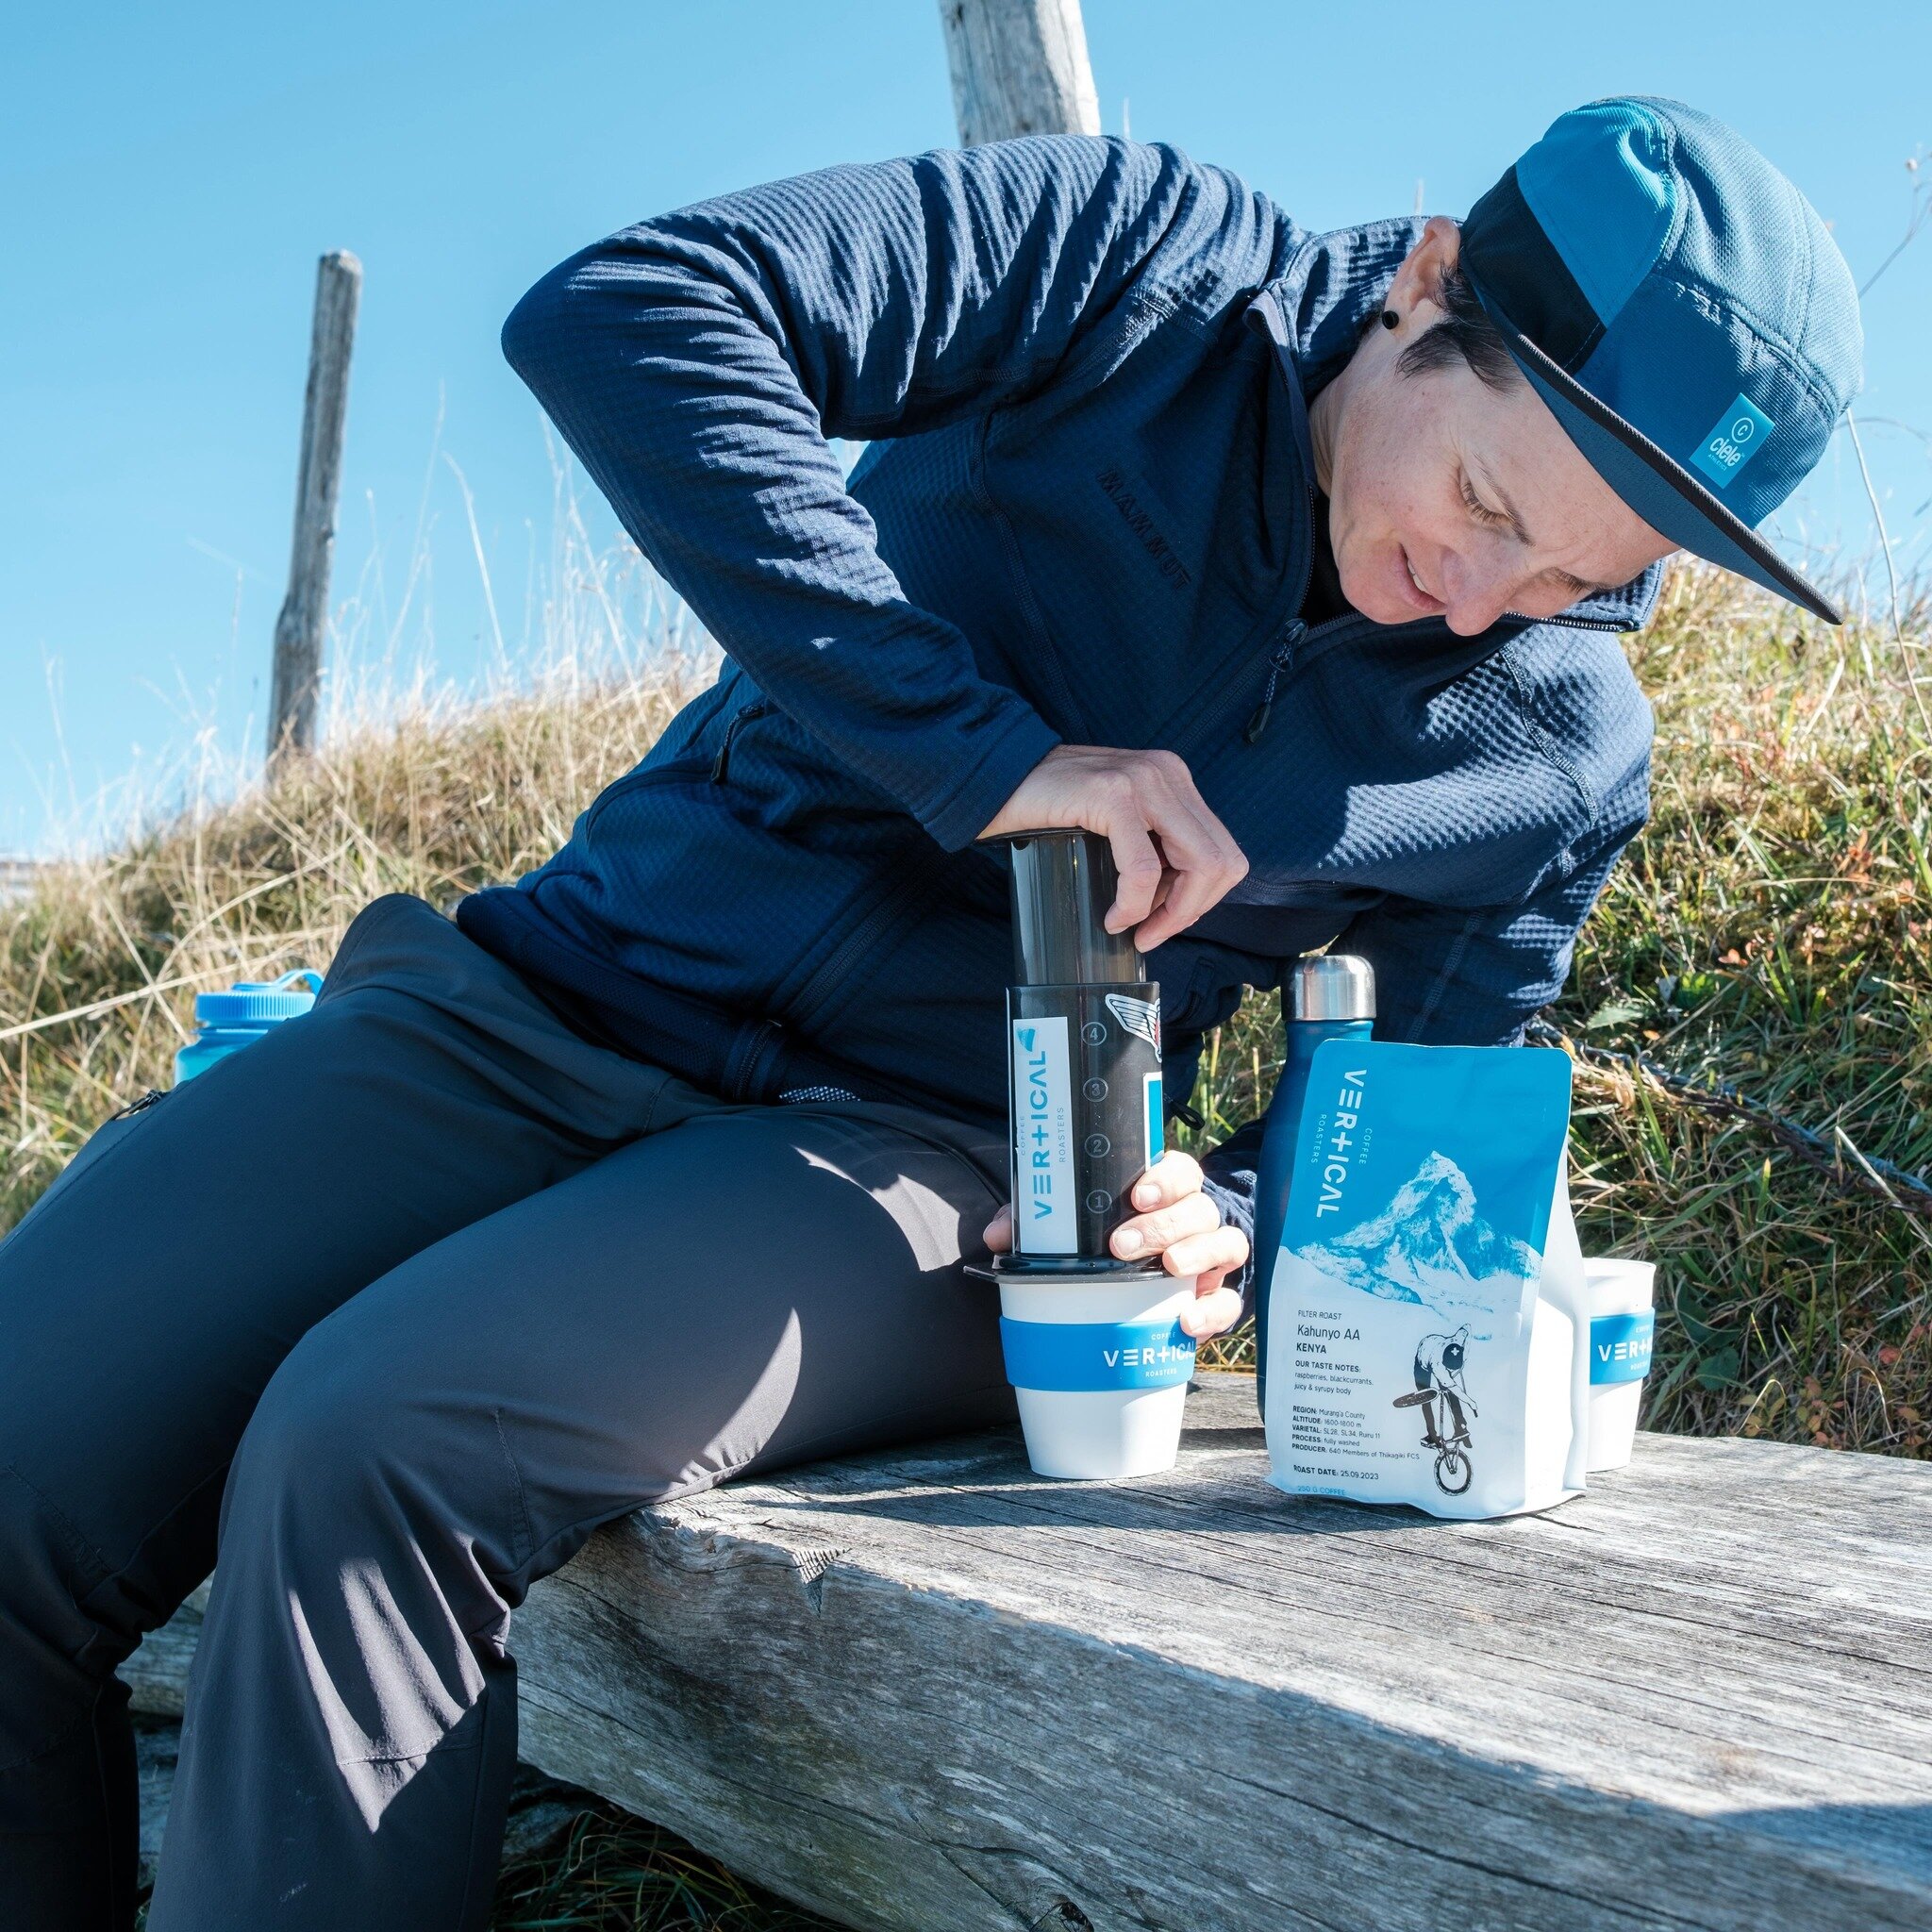 Make your weekend activity just a little bit more special 💙 bring tasty coffee 💙 or brew some outdoors 💙
. 
.
.
#greatcoffeeanywhere
#tastycoffeeactivity
#coffeehikes
#outdoorcoffeemaking
#gooutsidemakecoffee
#outsideisthebestside
#tastycoffee
#sp